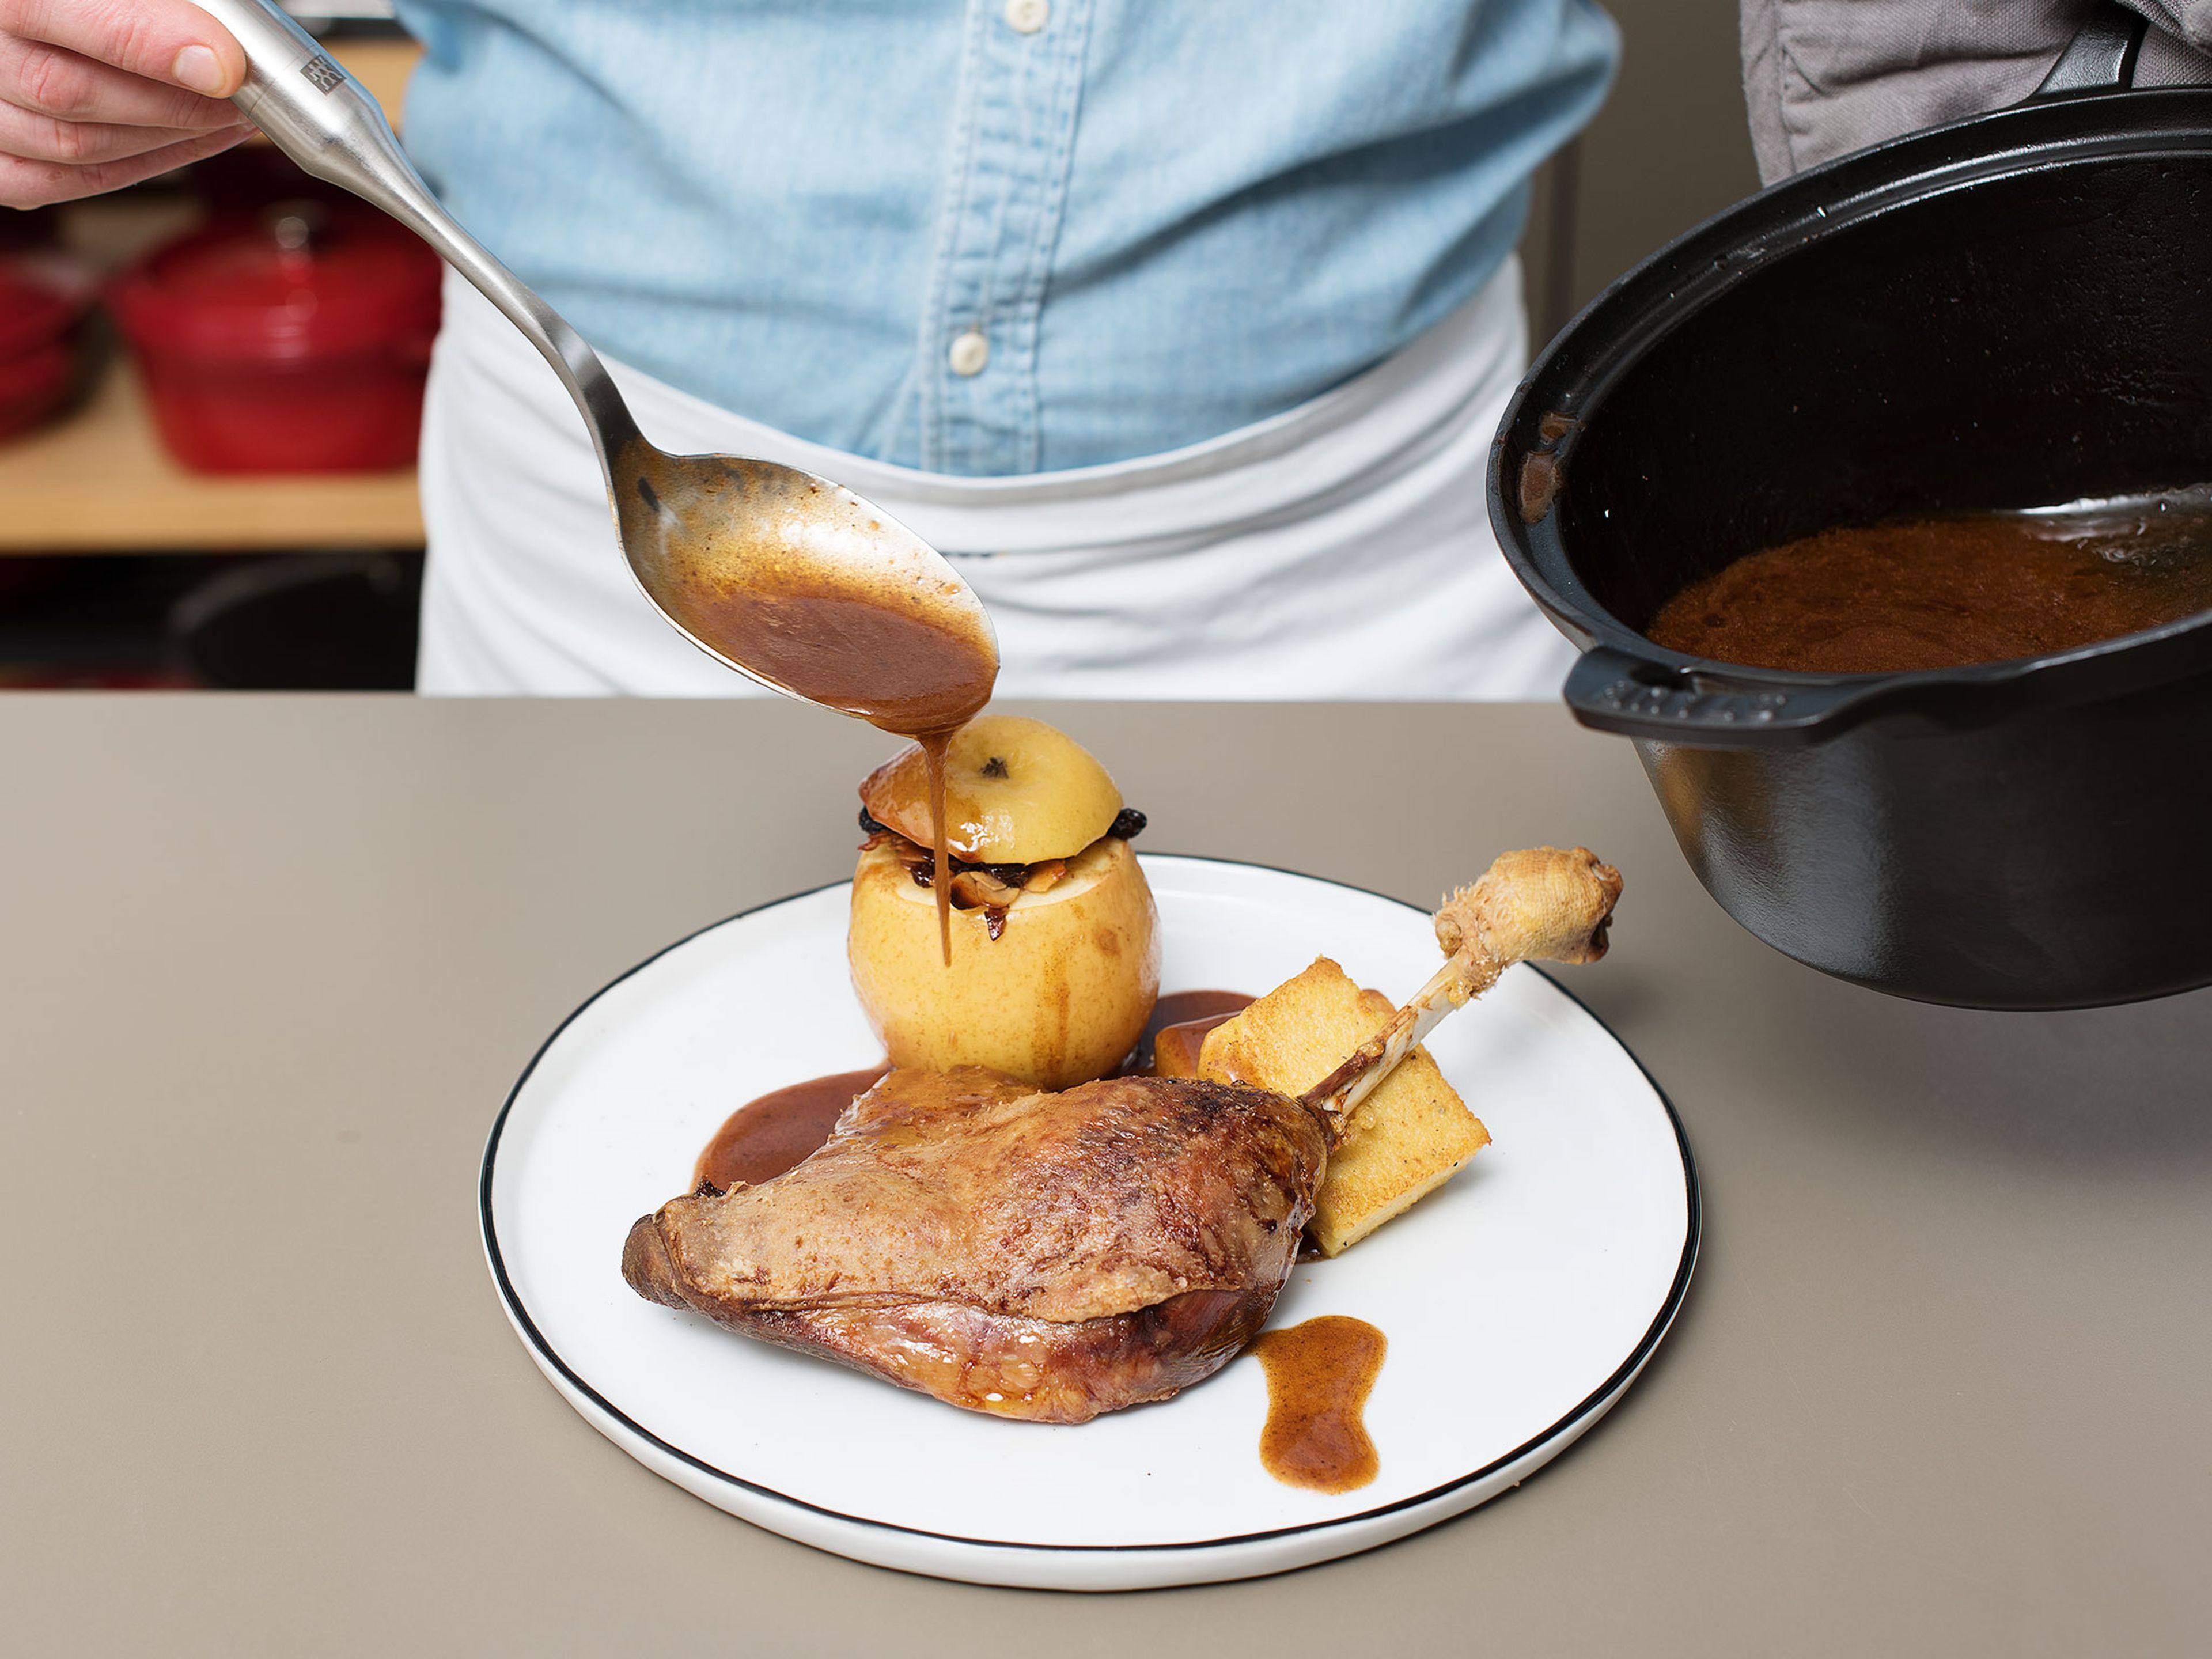 Serve stuffed apples, polenta, and goose leg and pour the sauce over the goose legs. Enjoy!